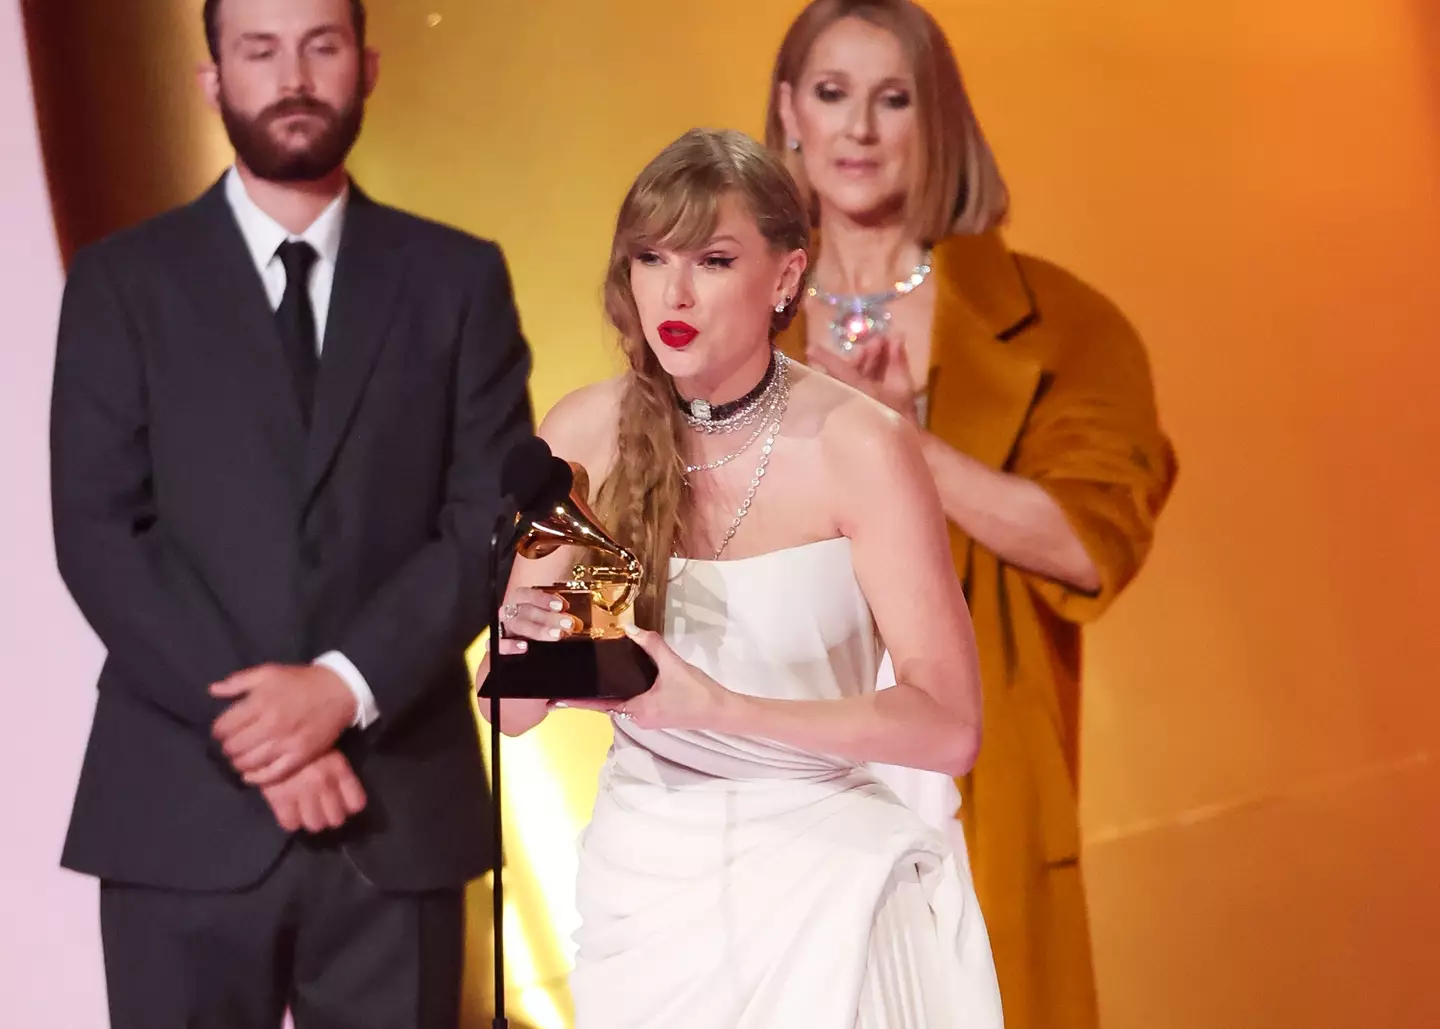 Some people have had an issue with how Taylor Swift accepted her Grammys award from Celine Dion.